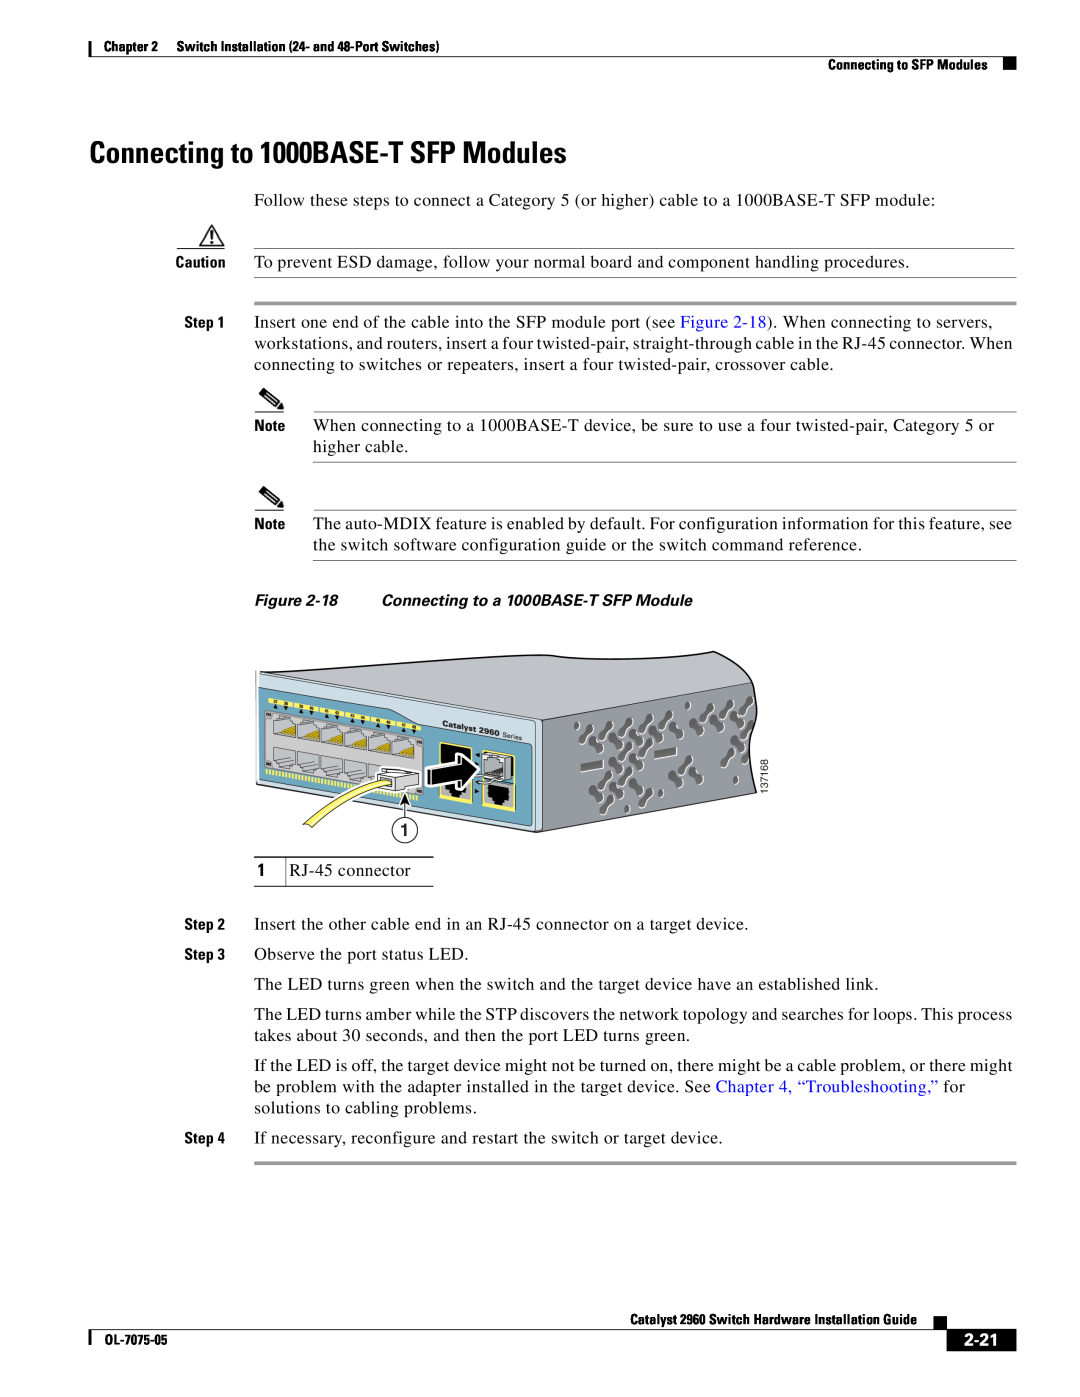 Cisco Systems 2960 specifications Connecting to 1000BASE-T SFP Modules, 2-21, 18 Connecting to a 1000BASE-T SFP Module 